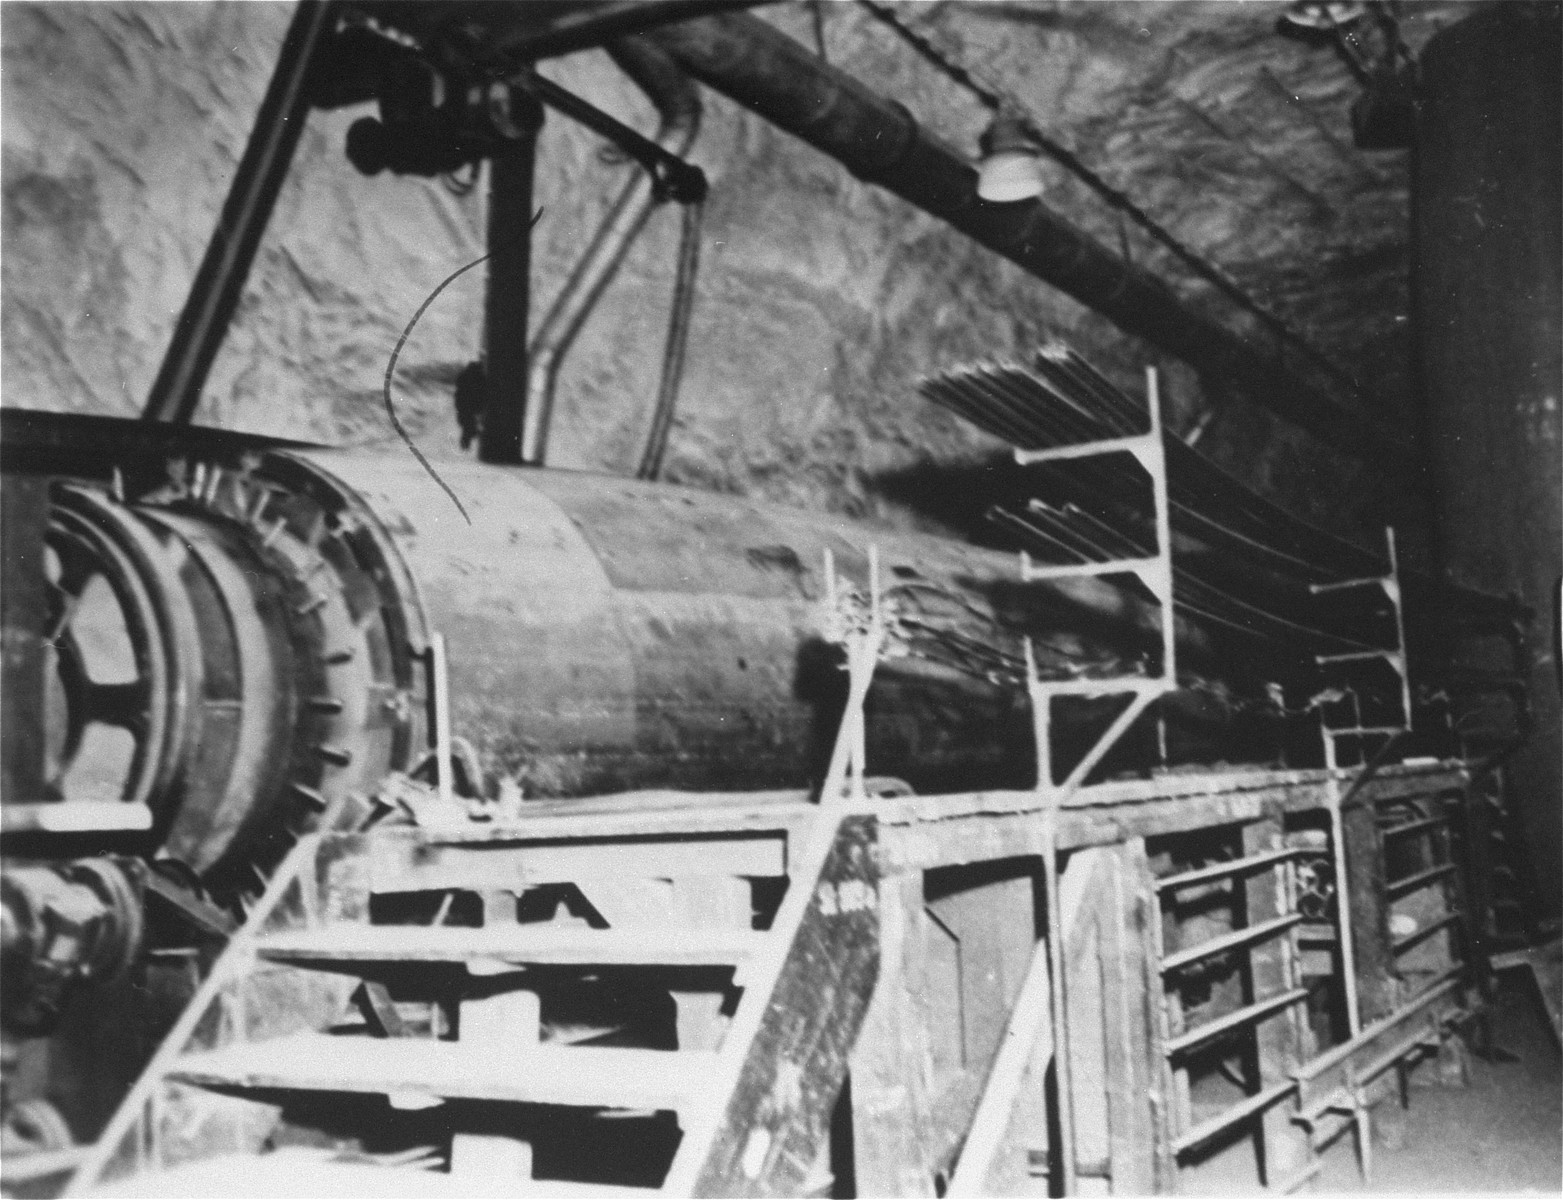 A large jig in the underground rocket plant, which was used to weld stringers to the skin.